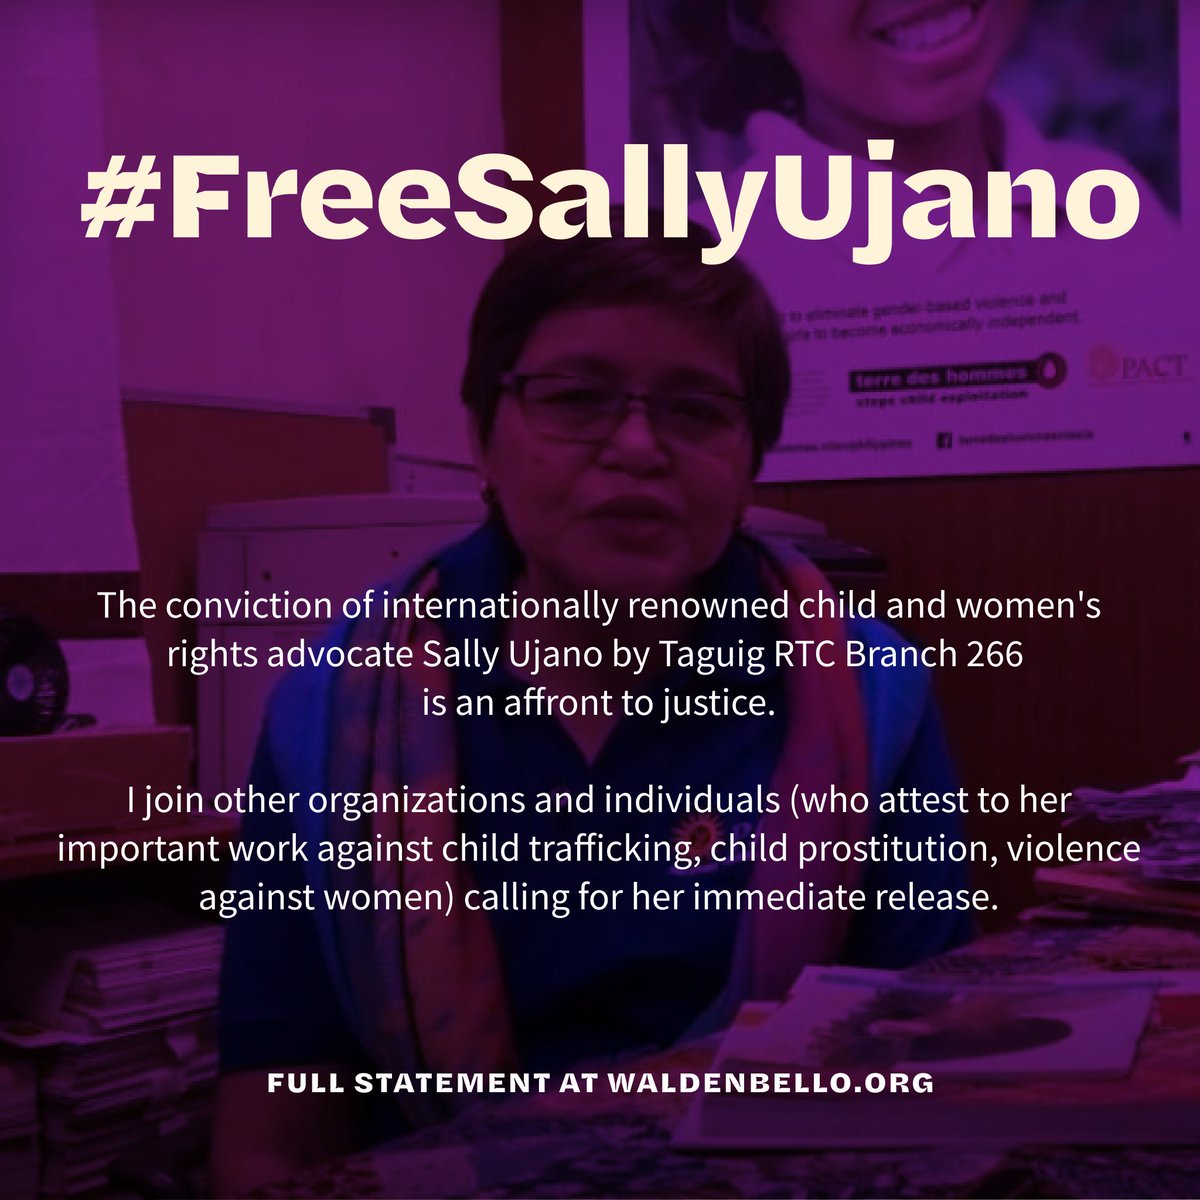 #FreeSallyUjano now!
The conviction of renowned child and women's rights advocate Sally Ujano is an affront to justice.
I join others (who attest to her important work against child trafficking, child prostitution, violence against women) calling for her immediate release.